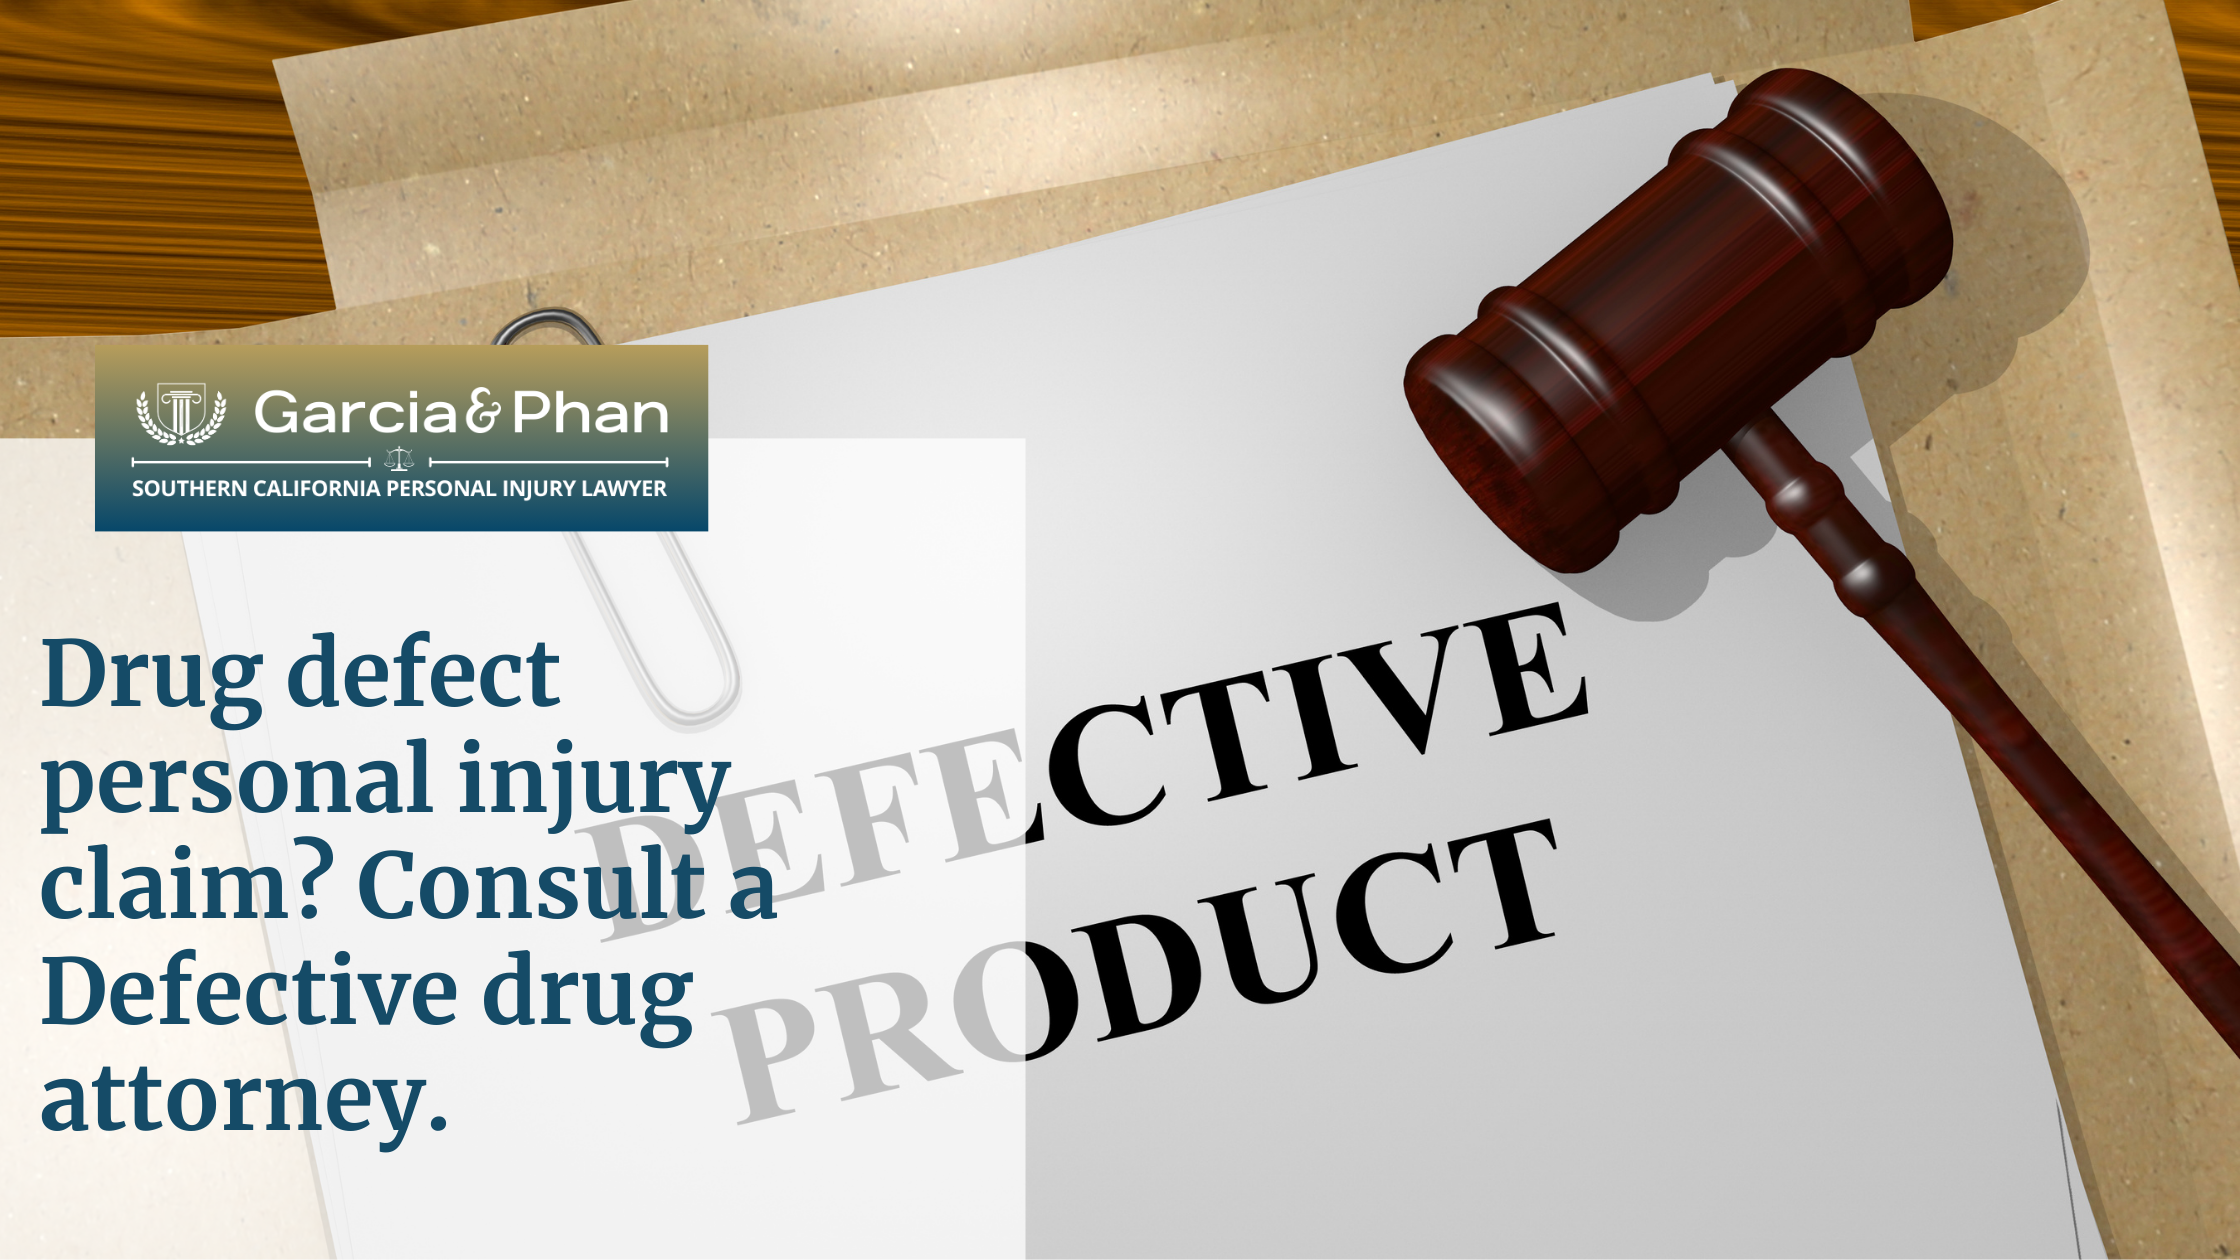 Drug defect personal injury claim Consult a Defective drug attorney. | GP